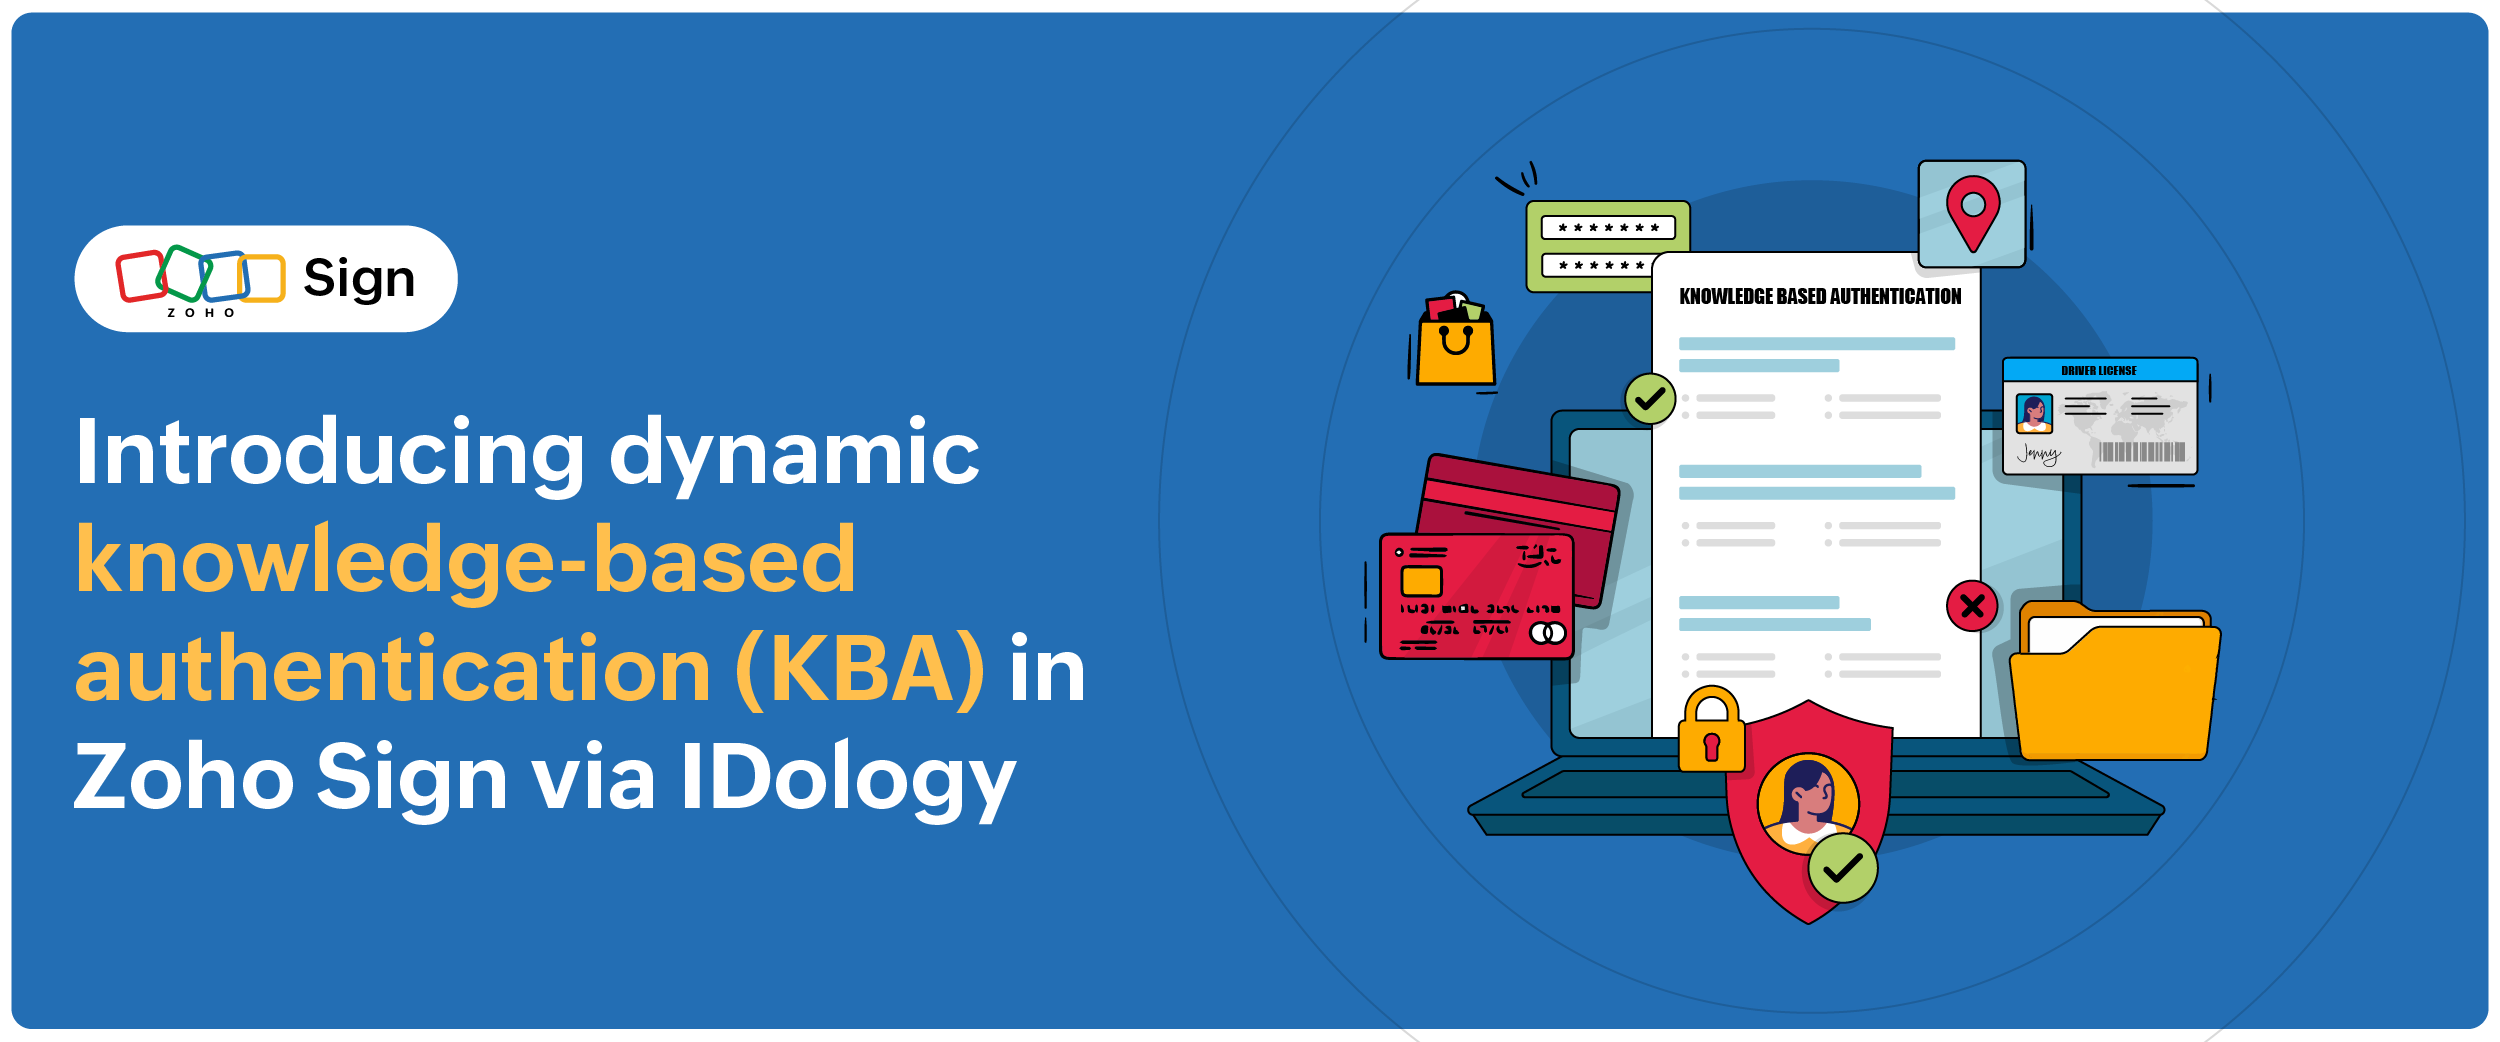 Introducing dynamic knowledge-based authentication (KBA) in Zoho Sign